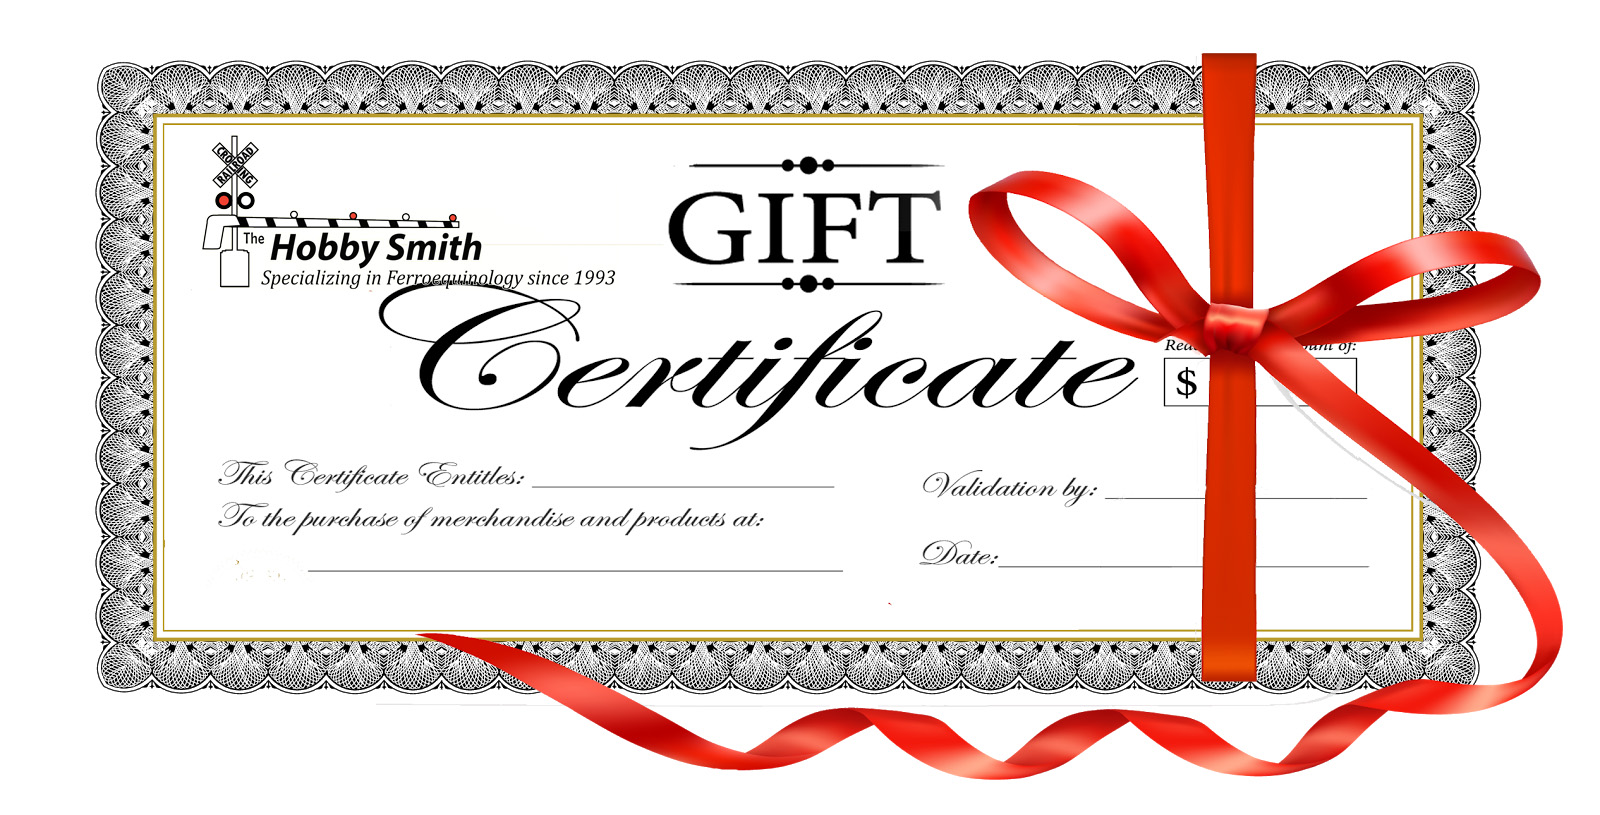 Gift Certificates Available at The Hobby Smith